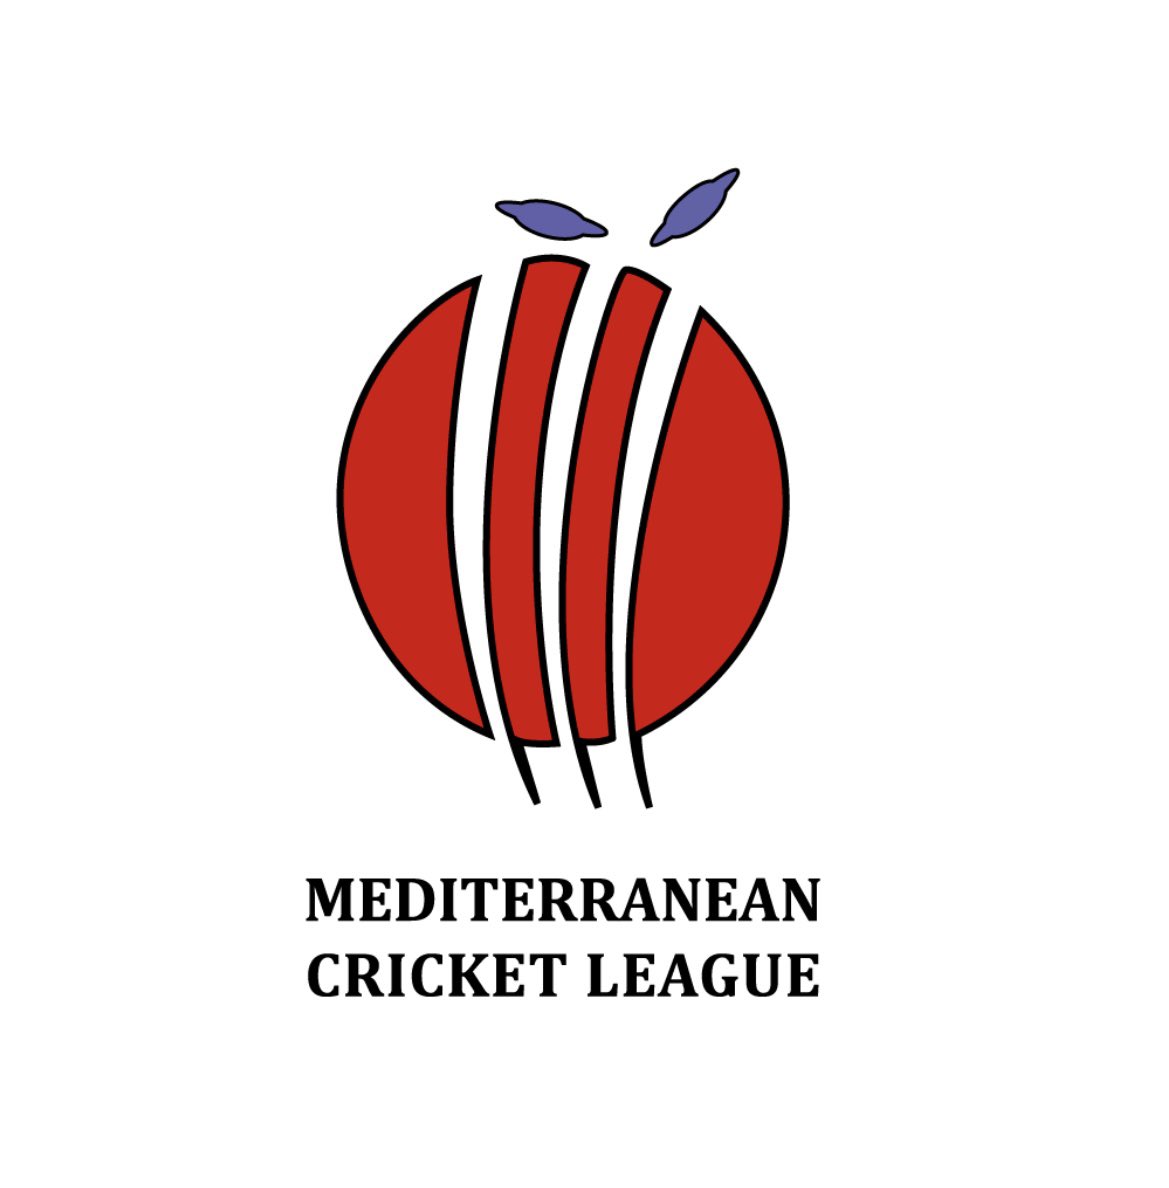 #MCL2024 will be played in #PortoMontenegro 27-30 May 2024. Reserve your team place now

#MediterraneanCricketLeague #T20 #CroatianCricketFederation #MontenegroBokaneers #LiveStreamed #SponsorPackagesAvailable #SPECIALGUESTPLAYERS #BradHogg #SimonKatich #DarrenMaddy #PavelFlorin